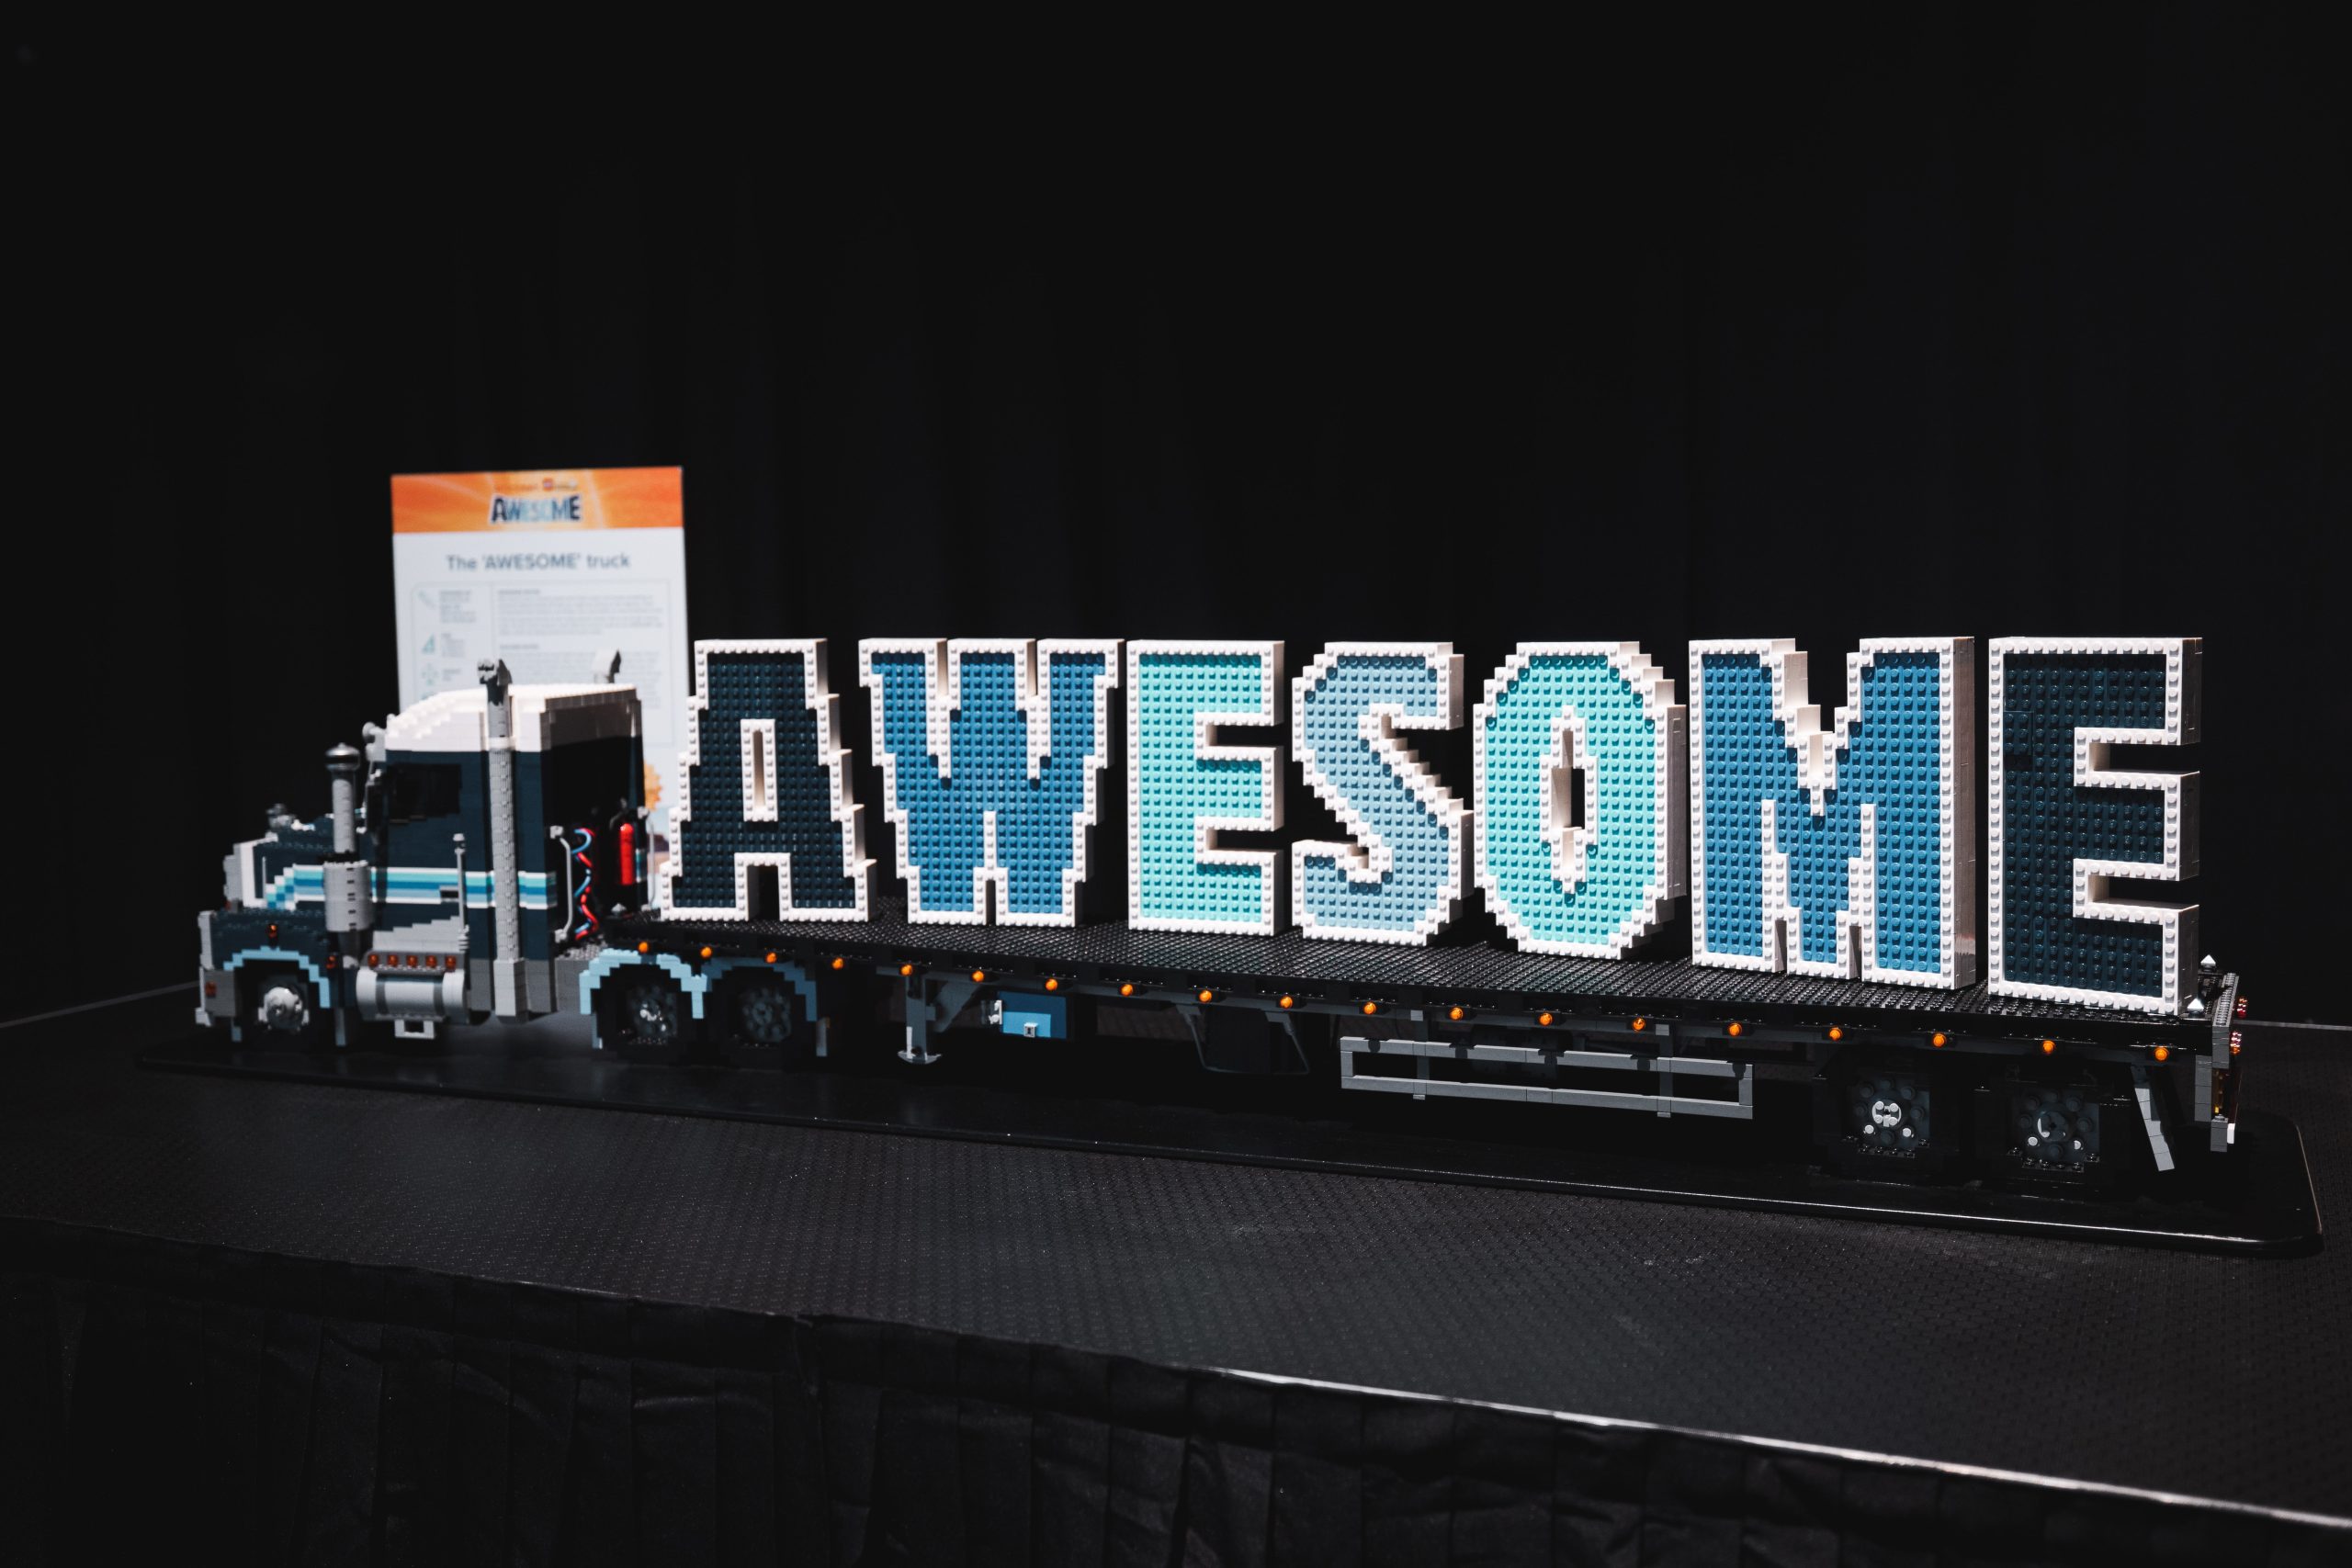 a big truck made of LEGO® bricks that spells out "AWESOME"